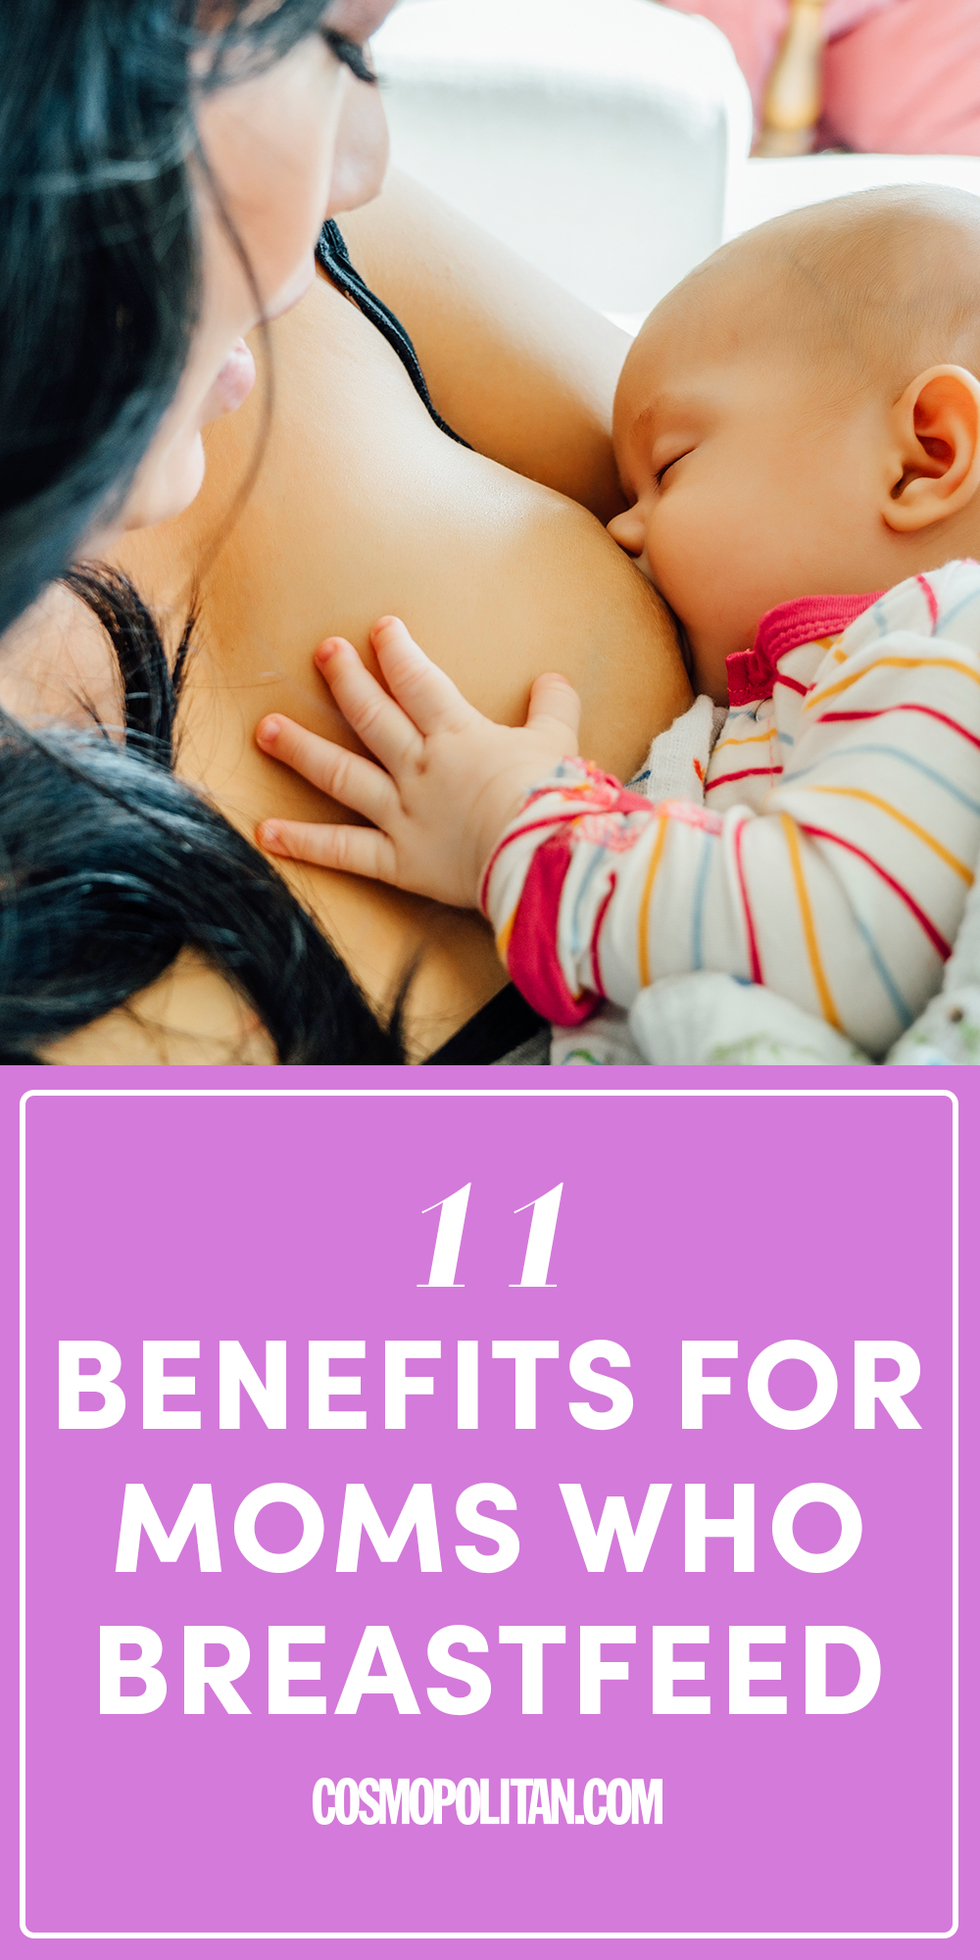 https://hips.hearstapps.com/hmg-prod/images/pin-11waysbreastfeeding-v2-1498151323.png?crop=1xw:1xh;center,top&resize=980:*